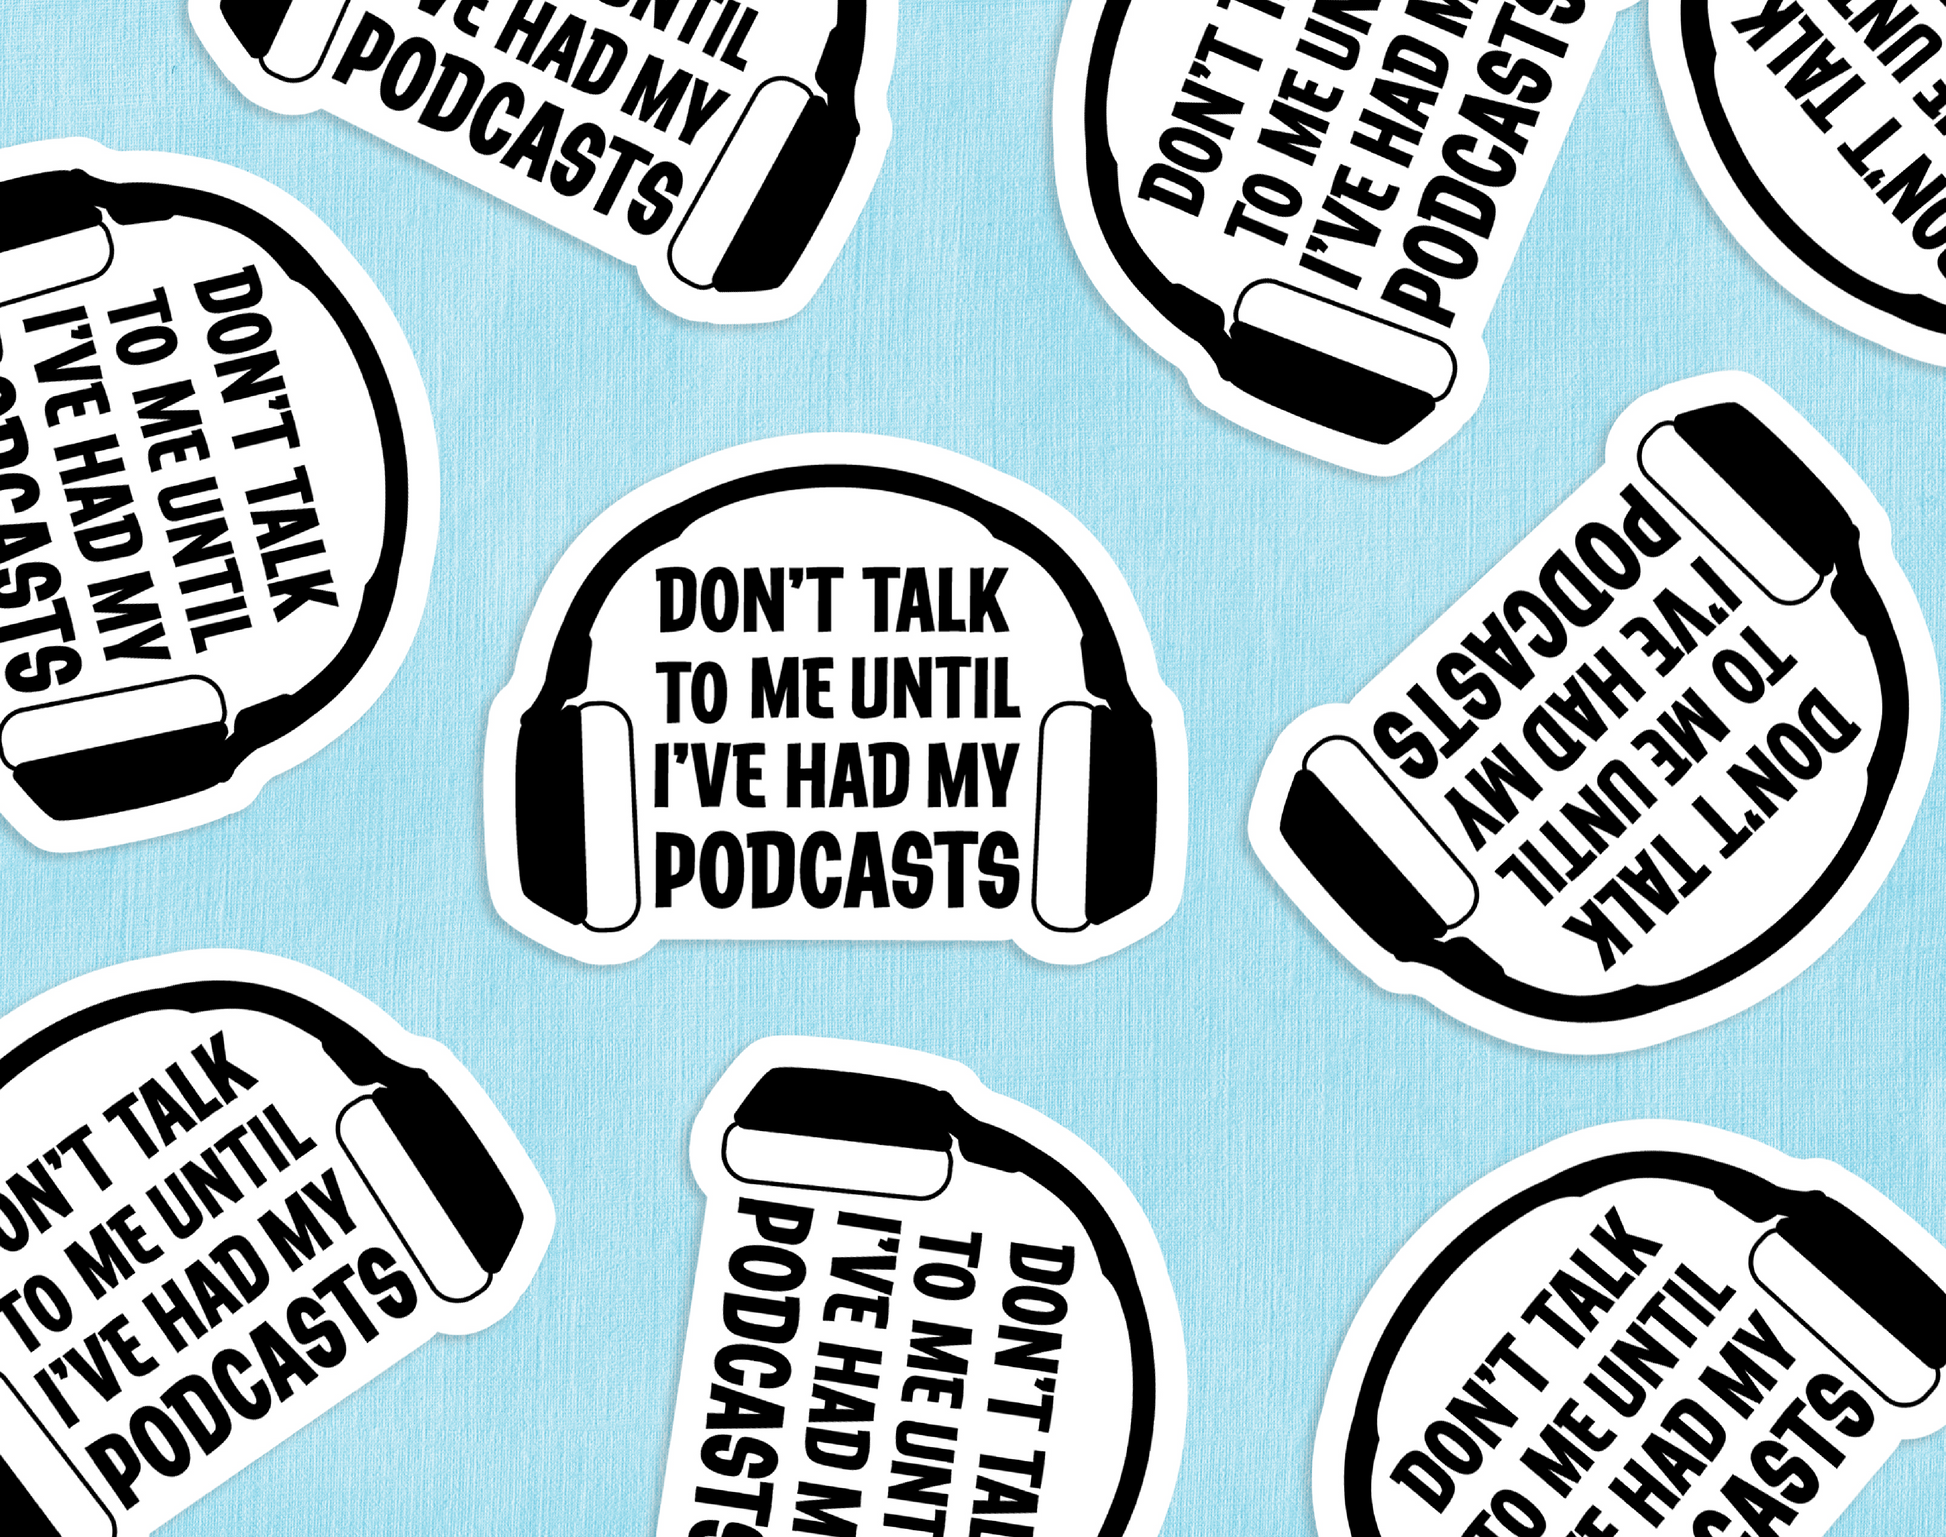 A group of die-cut stickers featuring headphones and text reading "Don't talk to me until I've had my podcasts" scattered across a blue paper backdrop